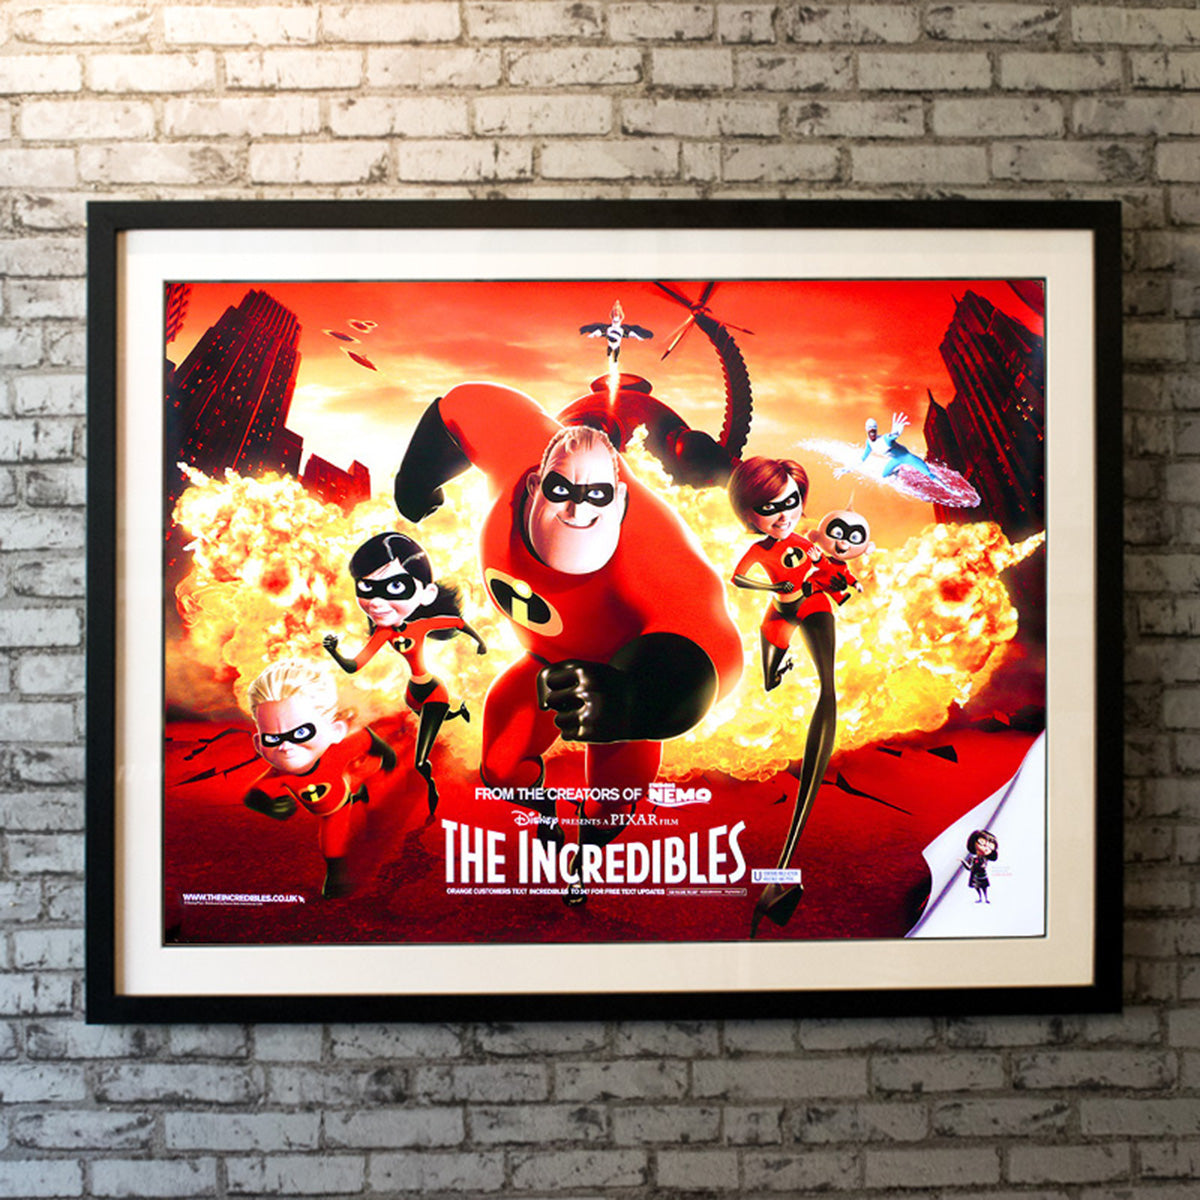 Original Movie Poster of Incredibles, The (2004)